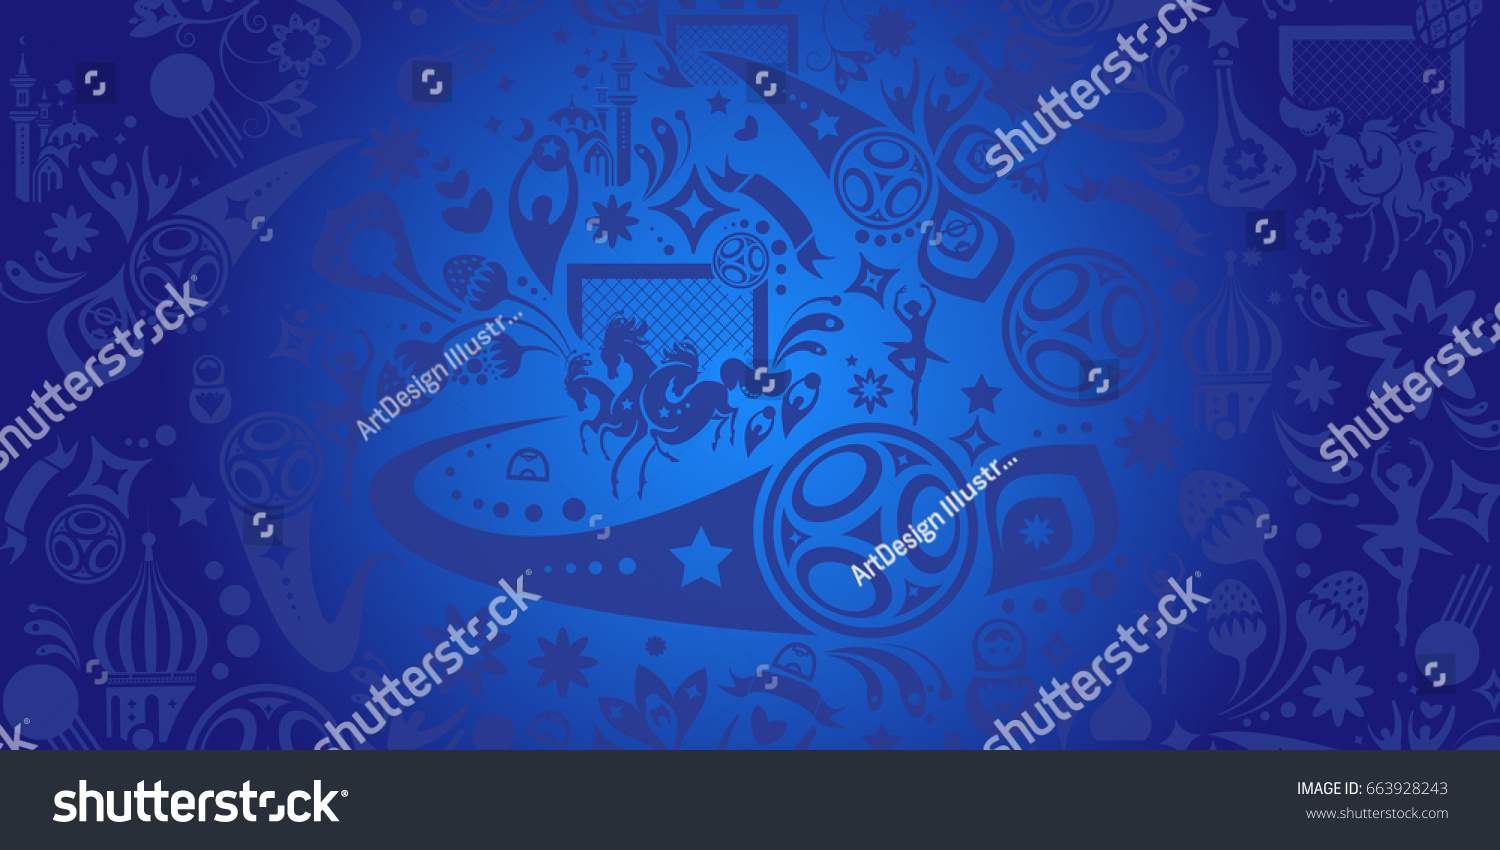 Russia Football World Cup Russian Stock Vector